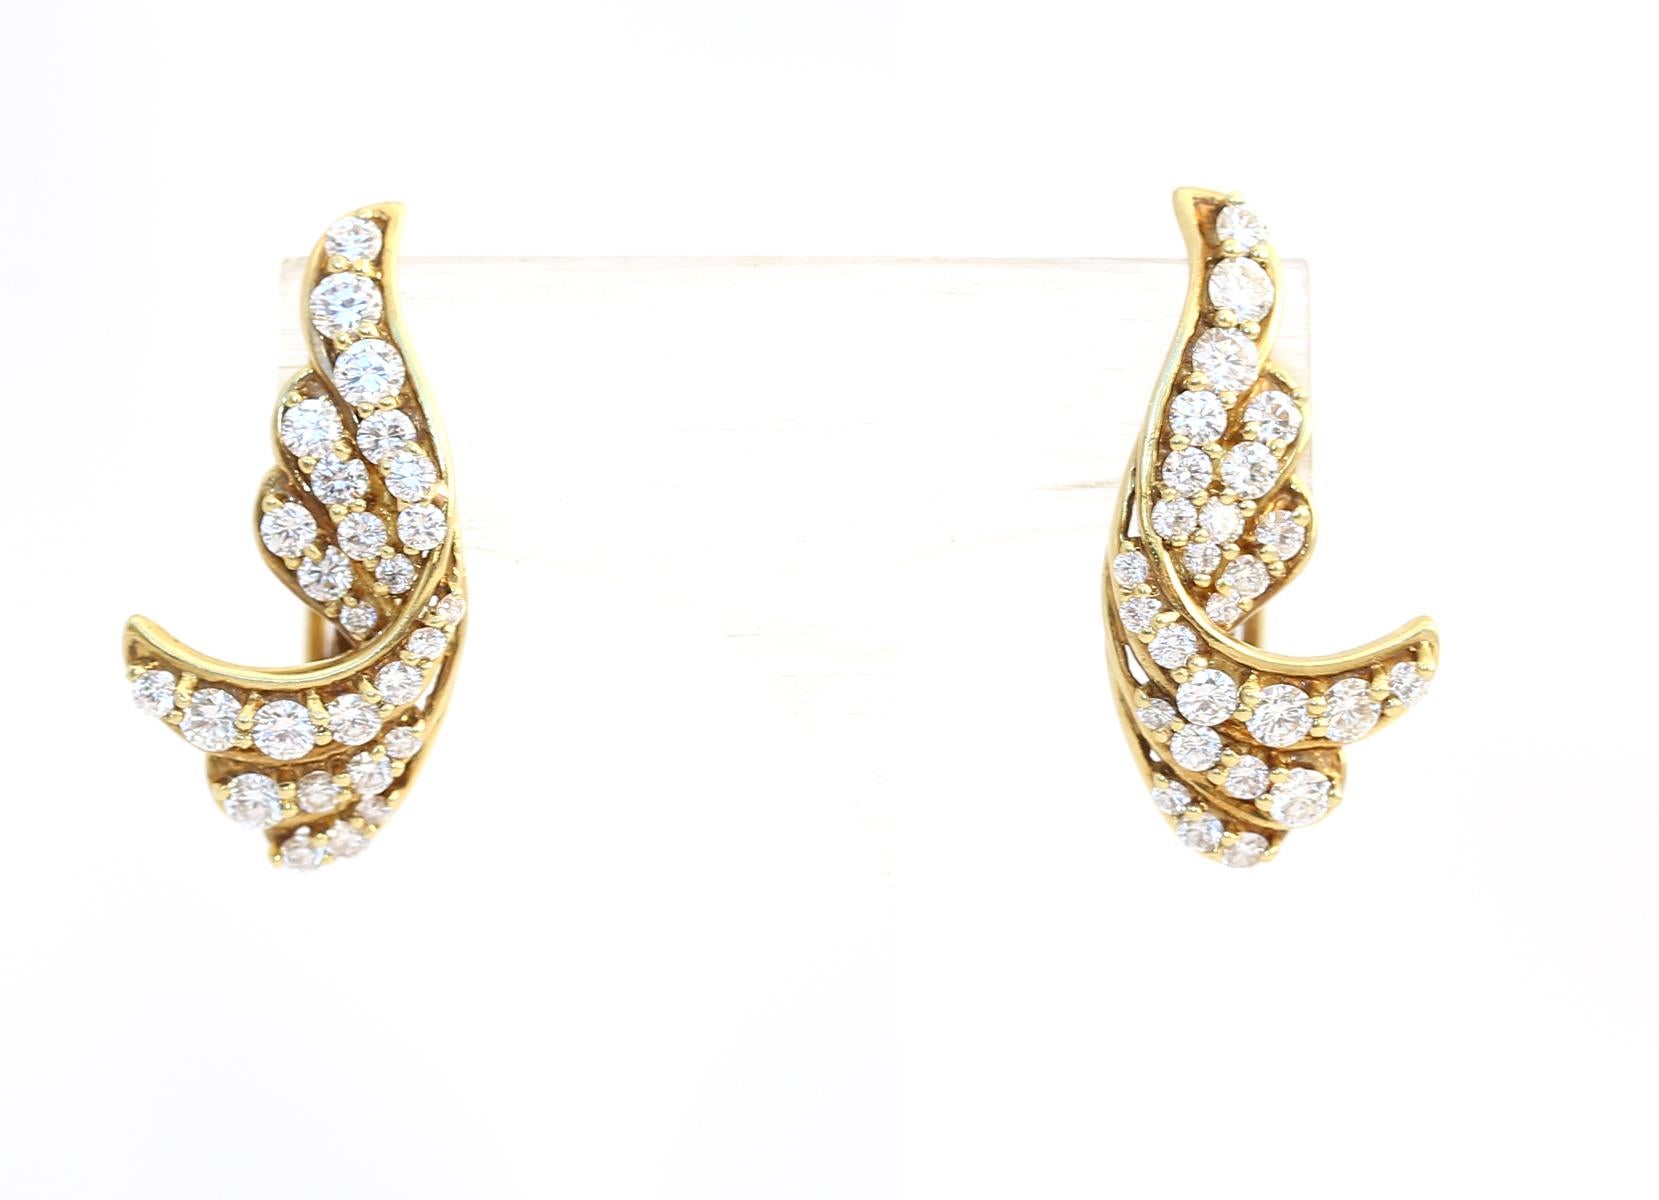 Fine Earclips in 18K Yellow Gold and 4.3 Carats of fine round cut Diamonds. Created around 1970 they reflect perfectly the shiny Disco times. The shape of the earrings remind a natural motive of the leaf masterfully crafted and overloaded with